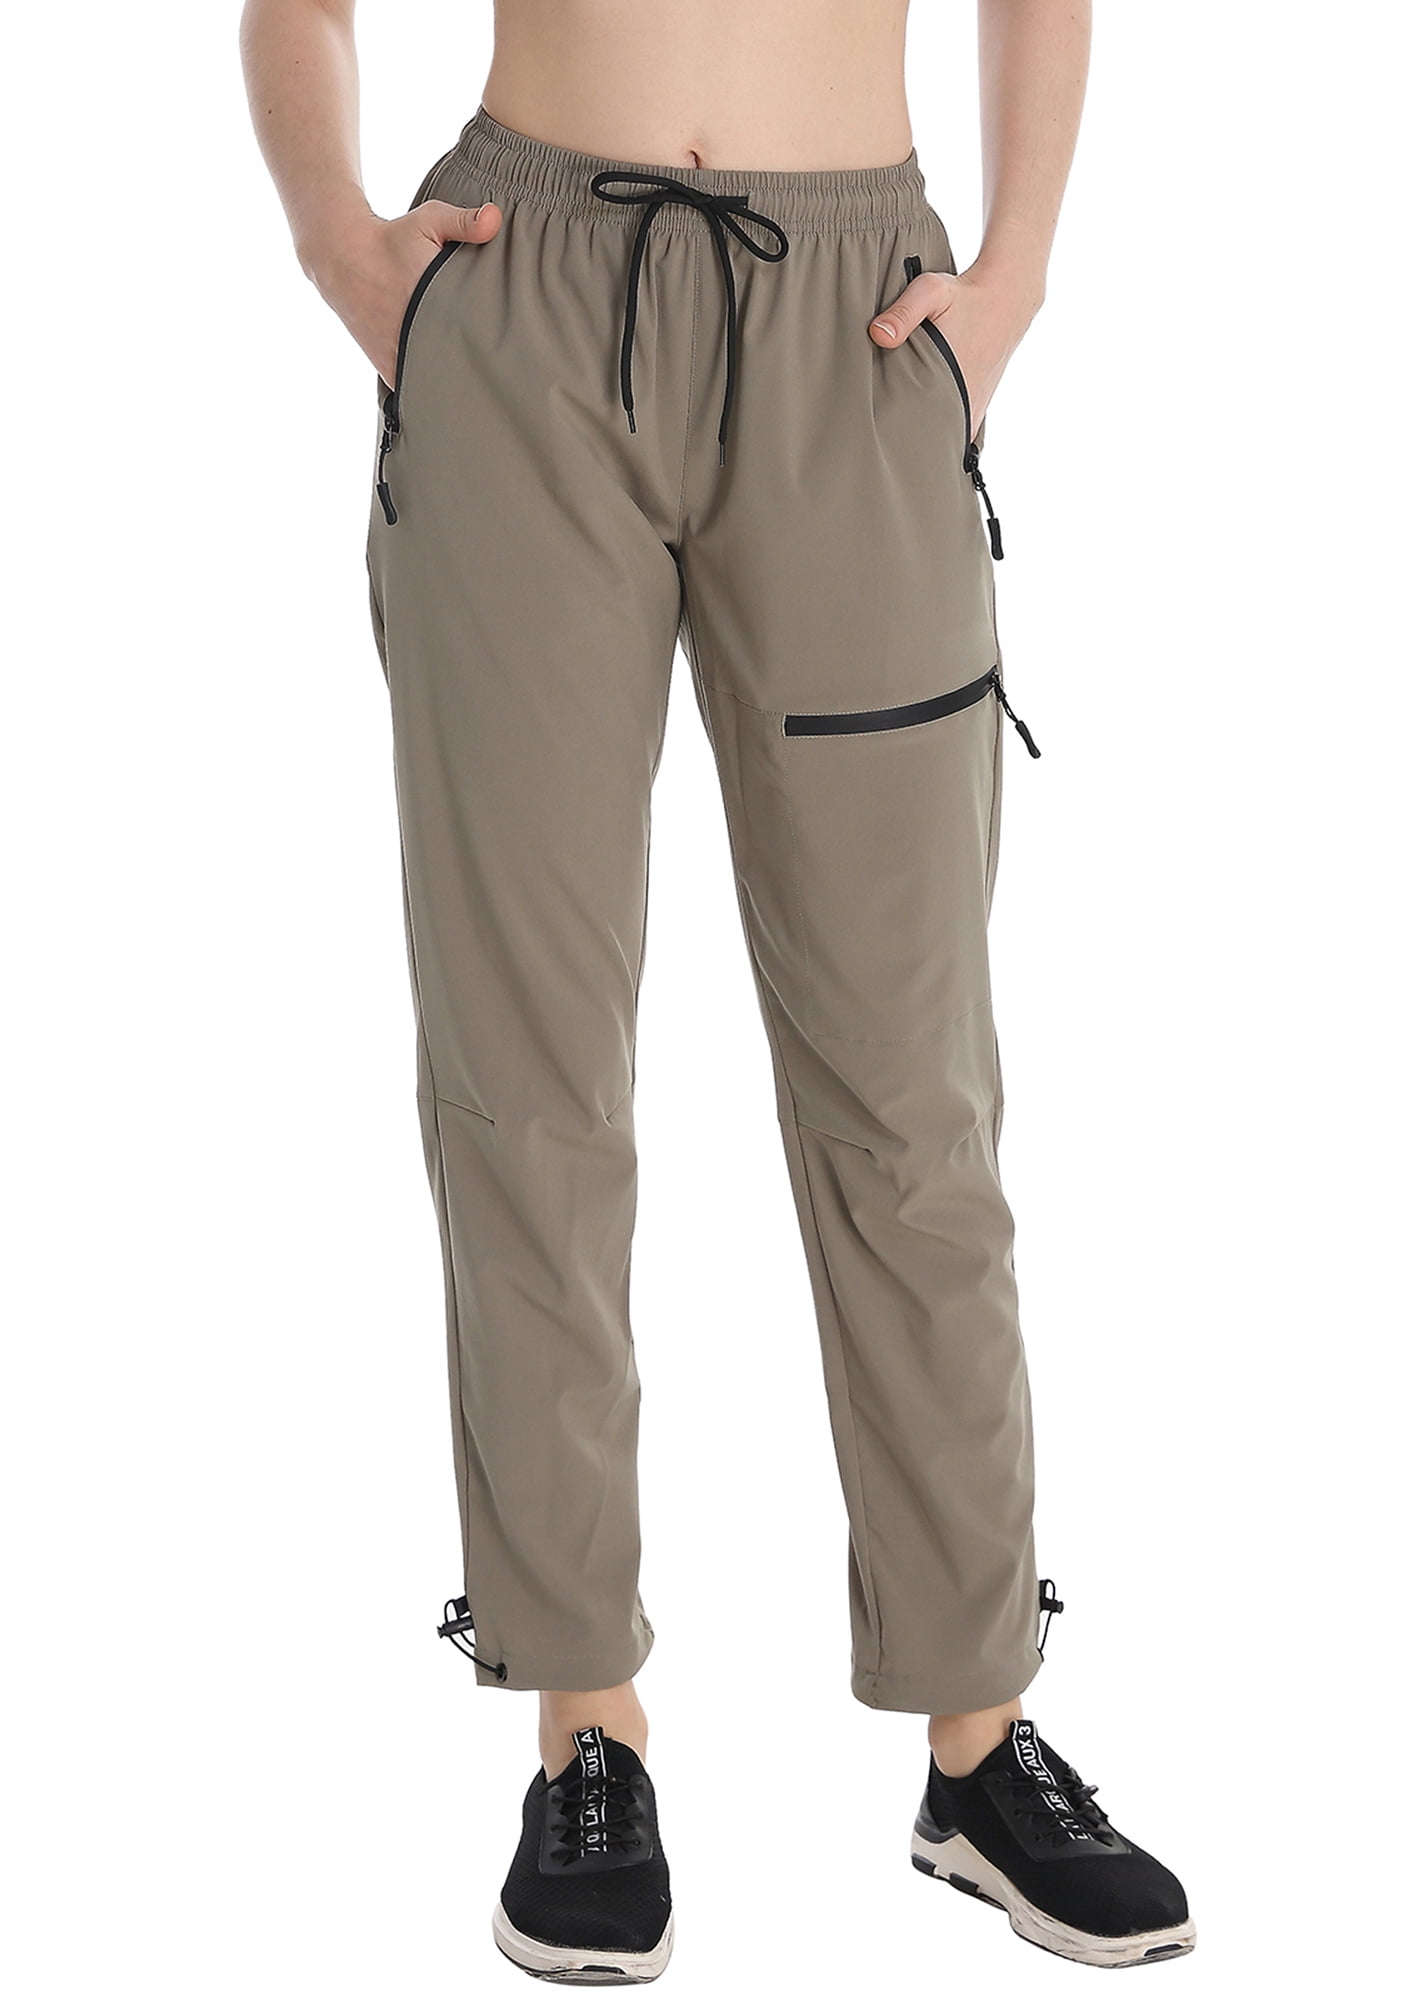  BALEAF Women's Hiking Pants Quick Dry Water Resistant